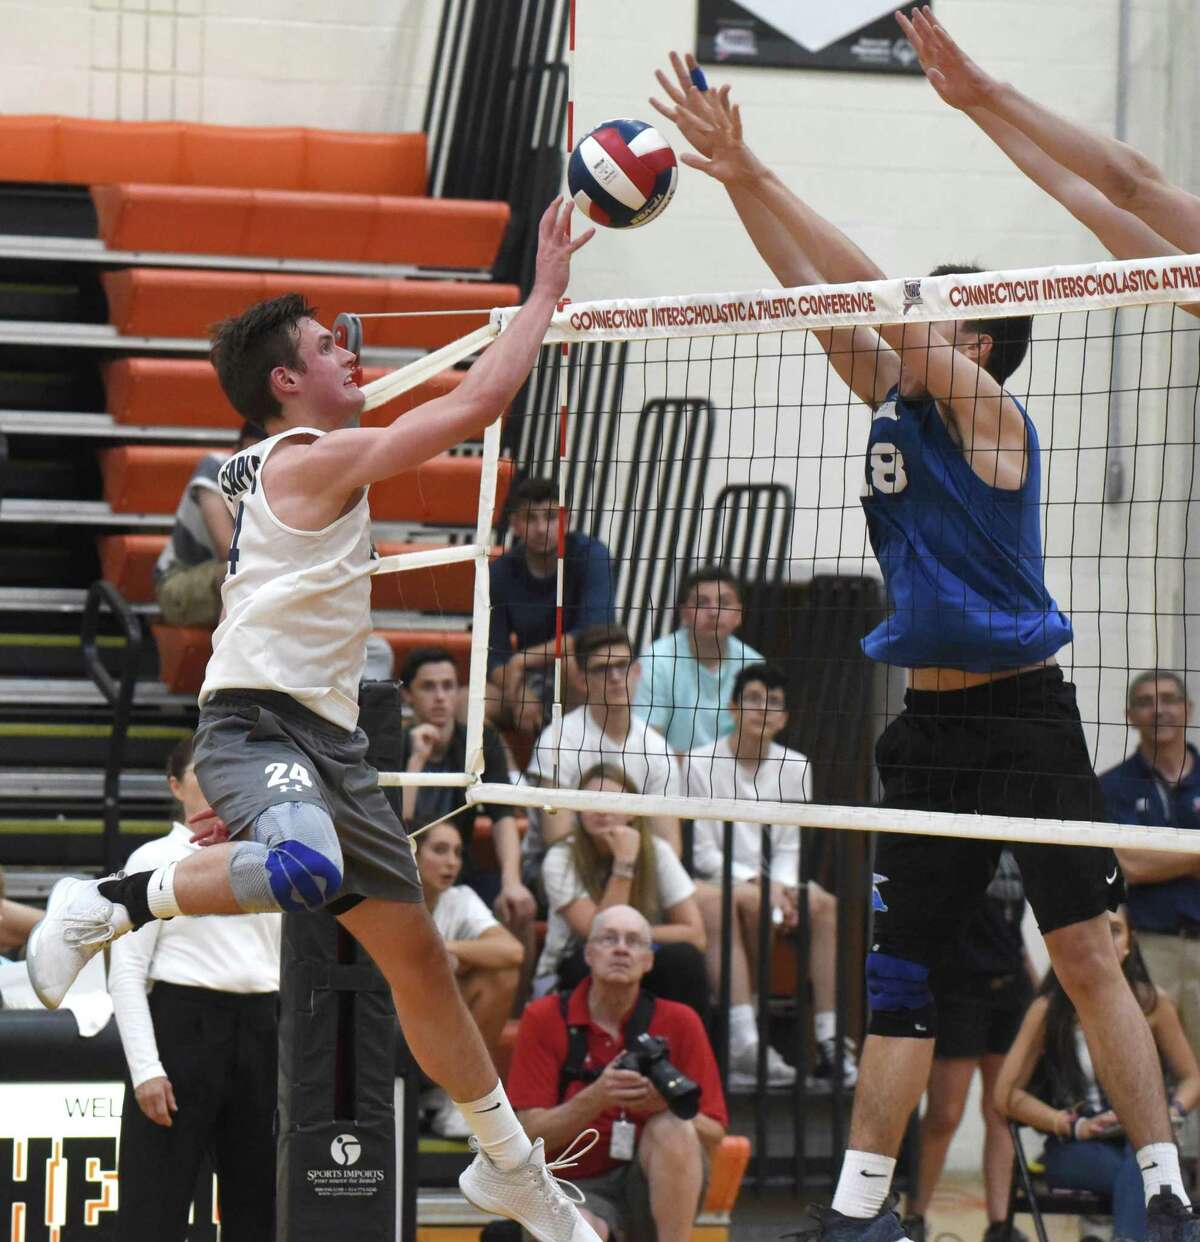 ‘Exceeding expectations’: Boys volleyball picks up where it left off